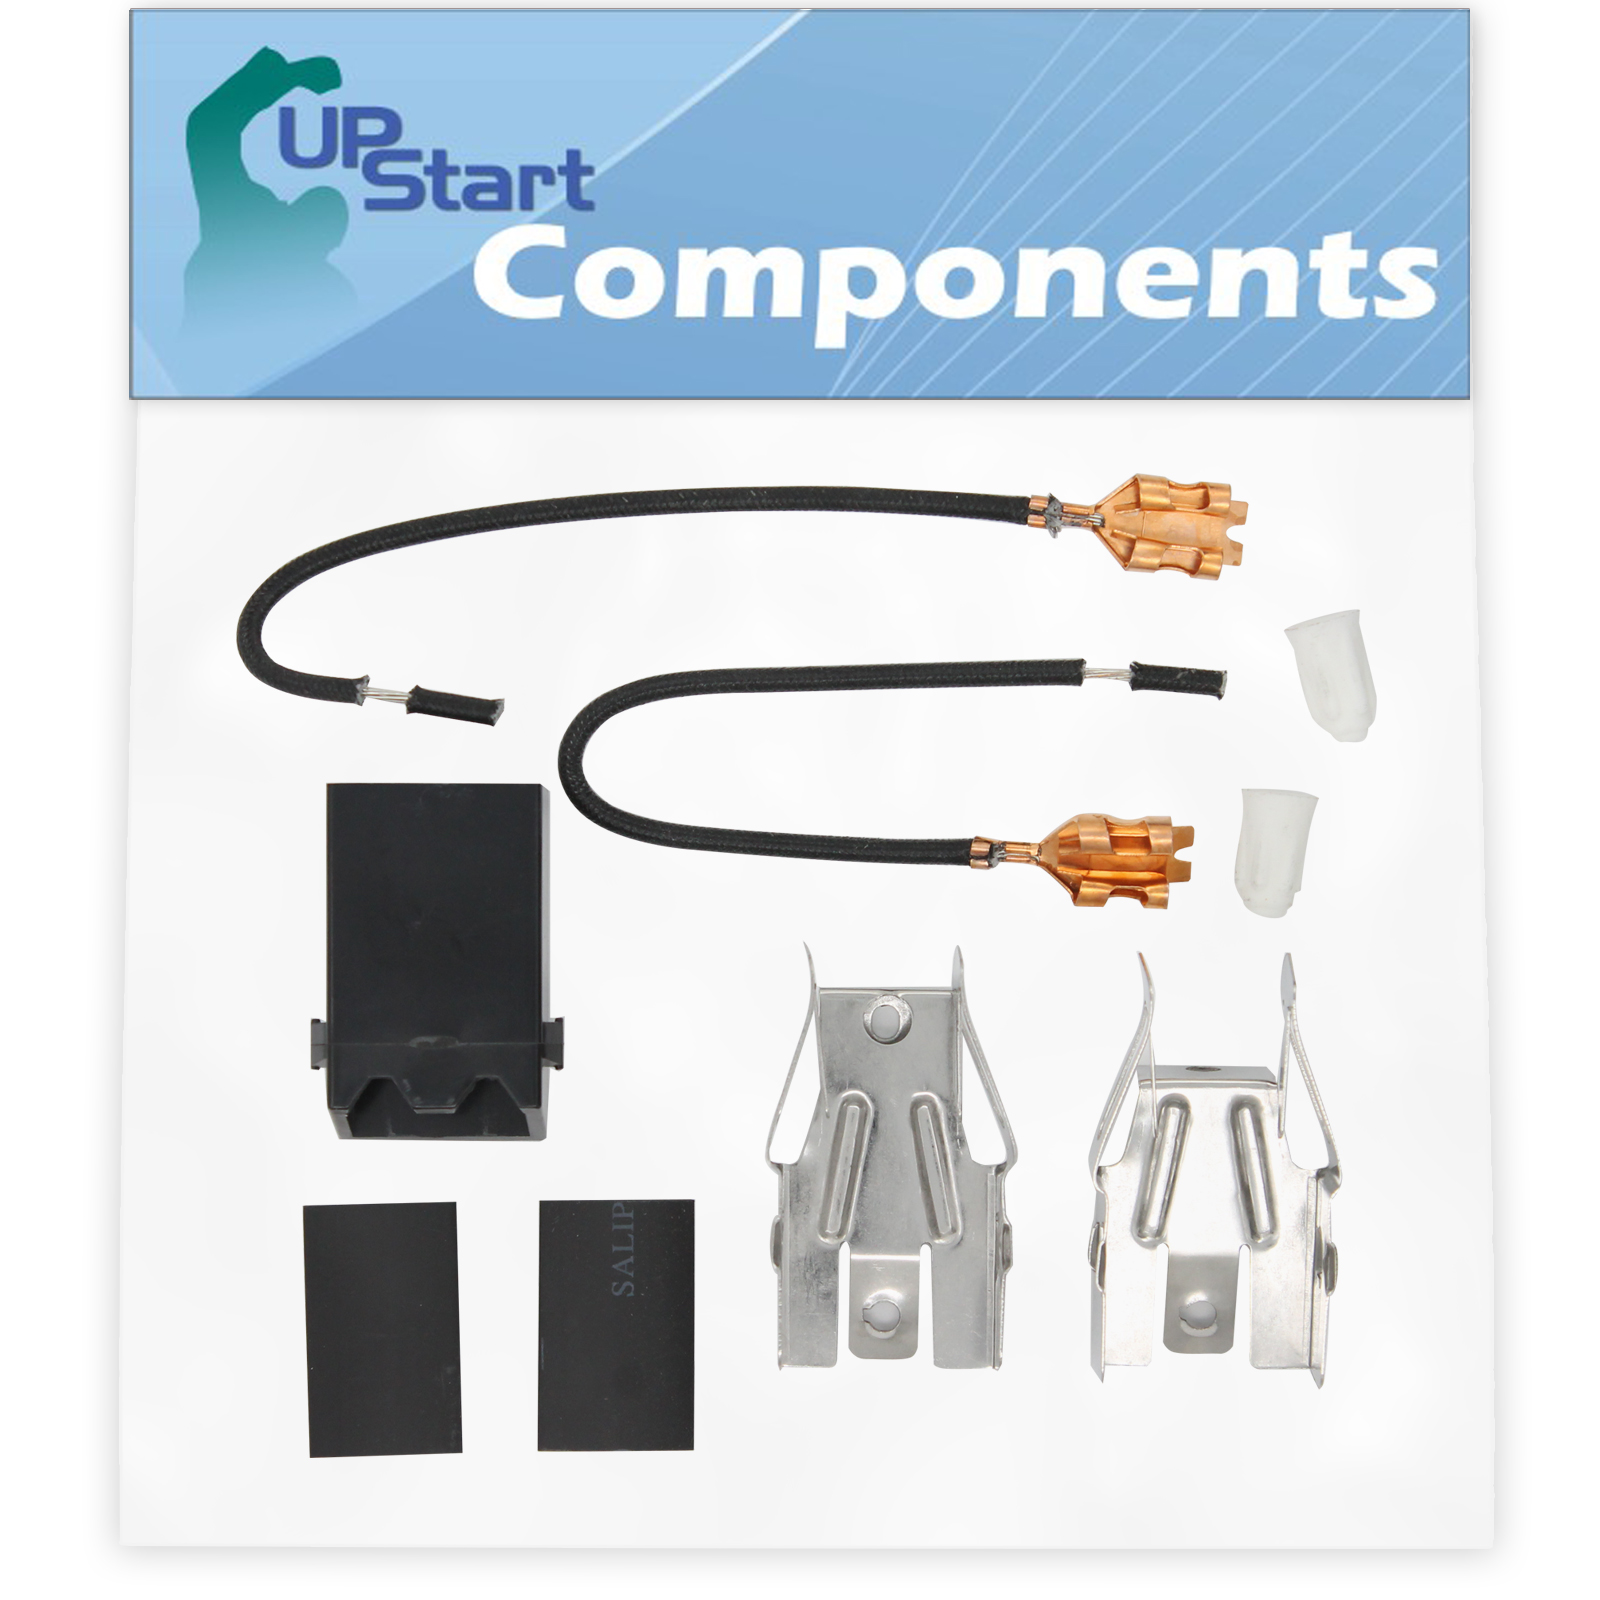 330031 Top Burner Receptacle Kit Replacement for Amana ARR6400LL (P1143820NLL) Range/Cooktop/Oven - Compatible with 330031 Range Burner Receptacle Kit - UpStart Components Brand - image 1 of 4